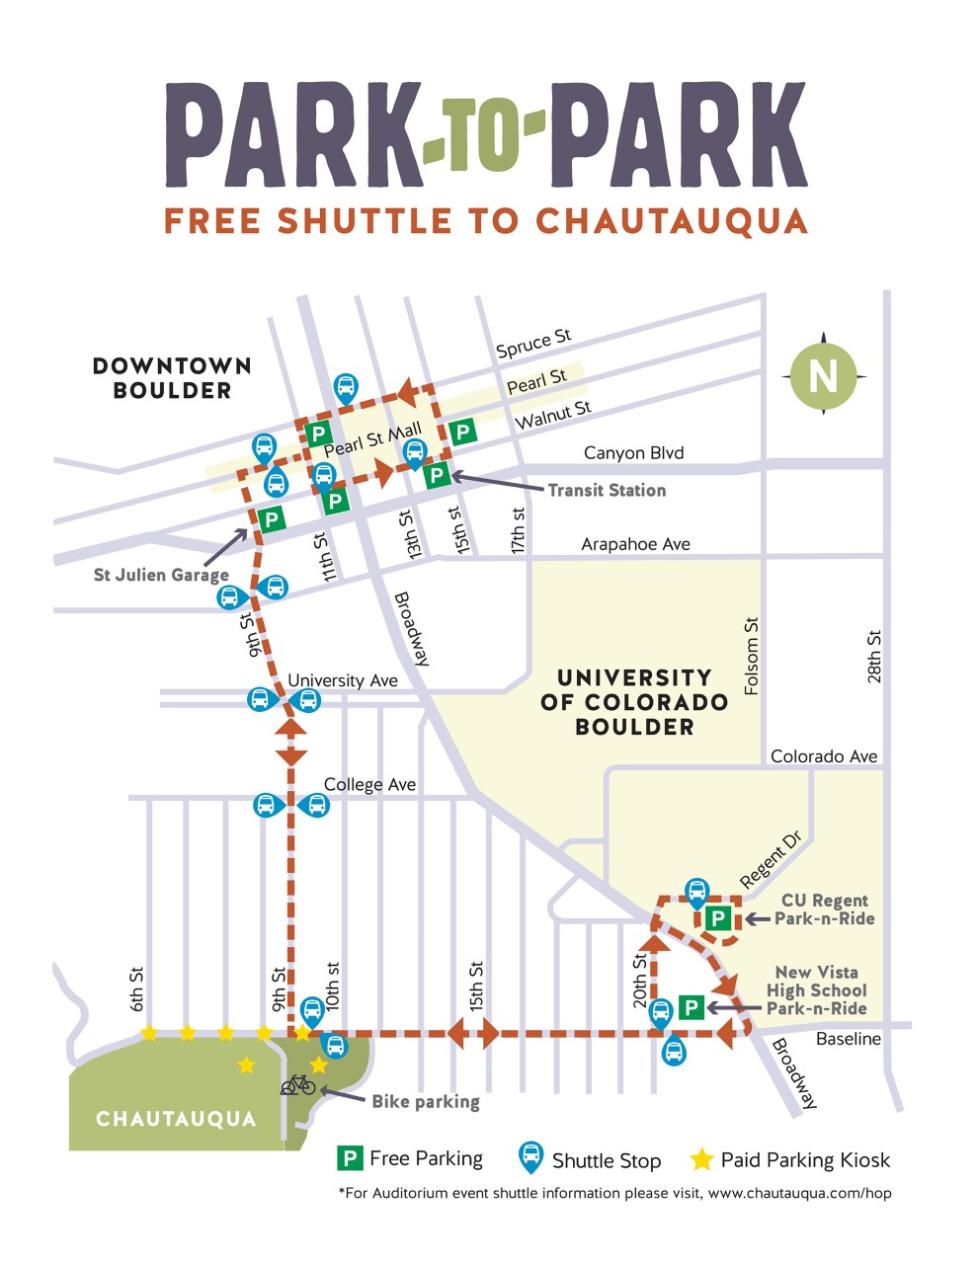 A map of the park-to-park shuttle